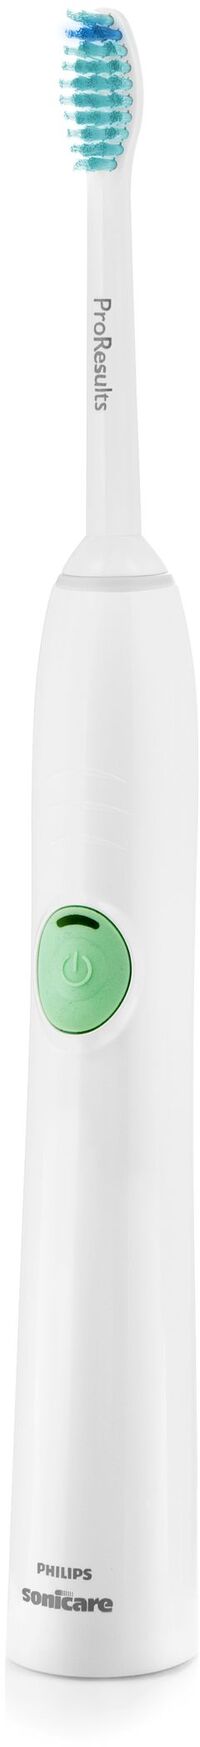 Philips Sonicare EasyClean HX6511 wit, groen / duo pack